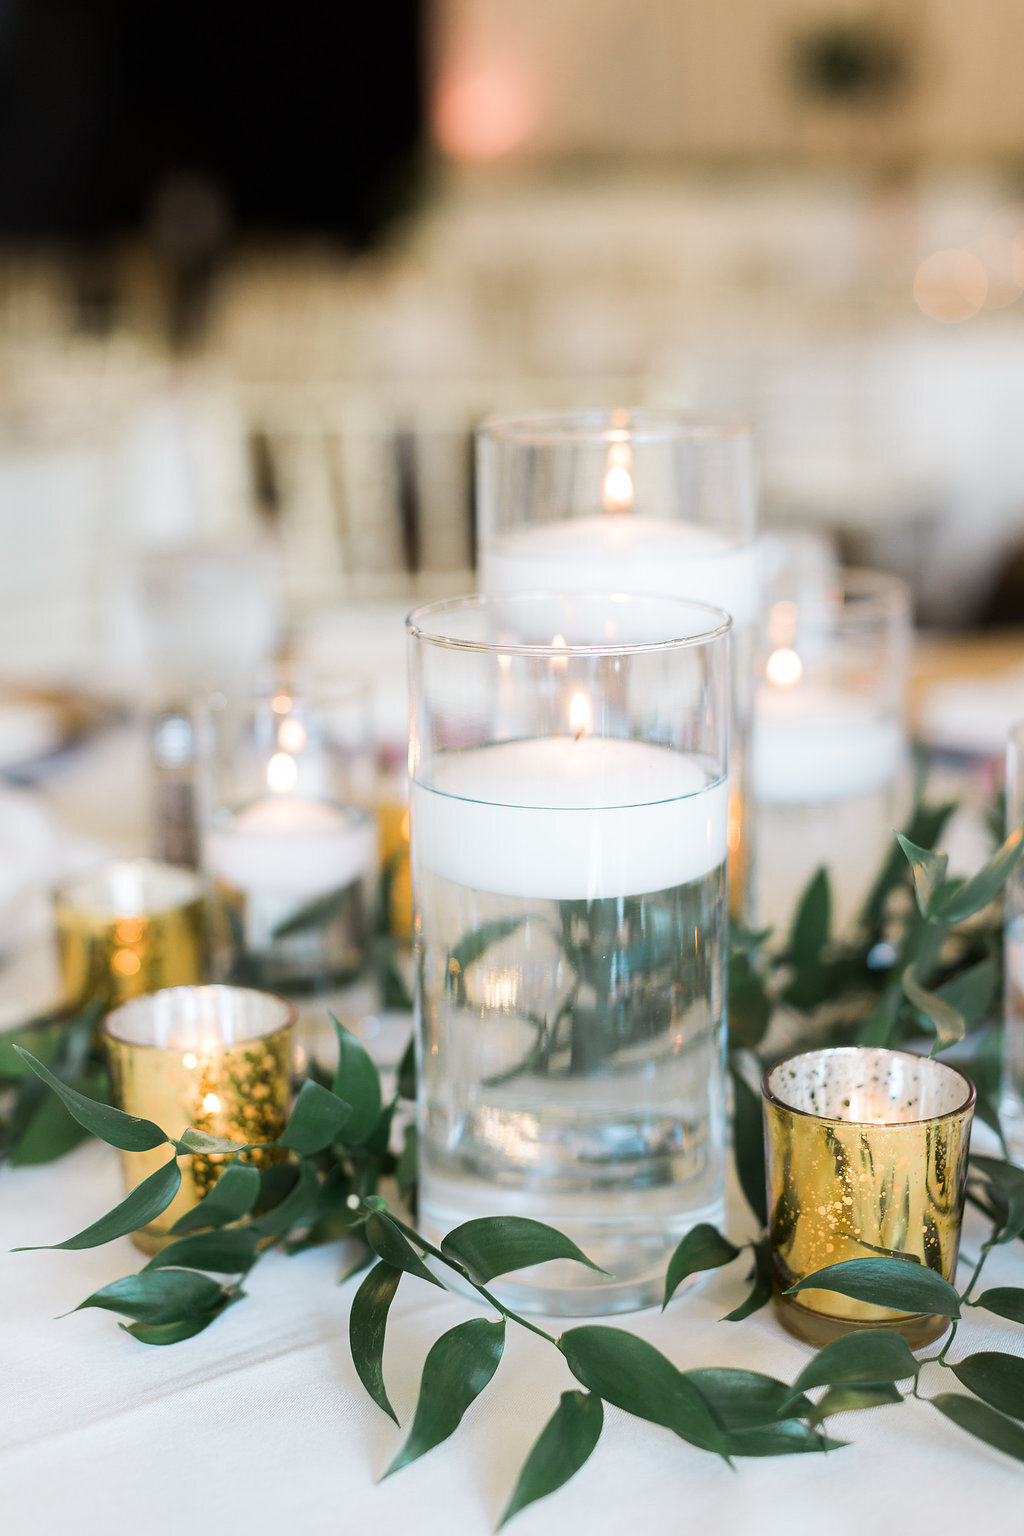 Floating candles with greenery and Gold mercury glass accents.